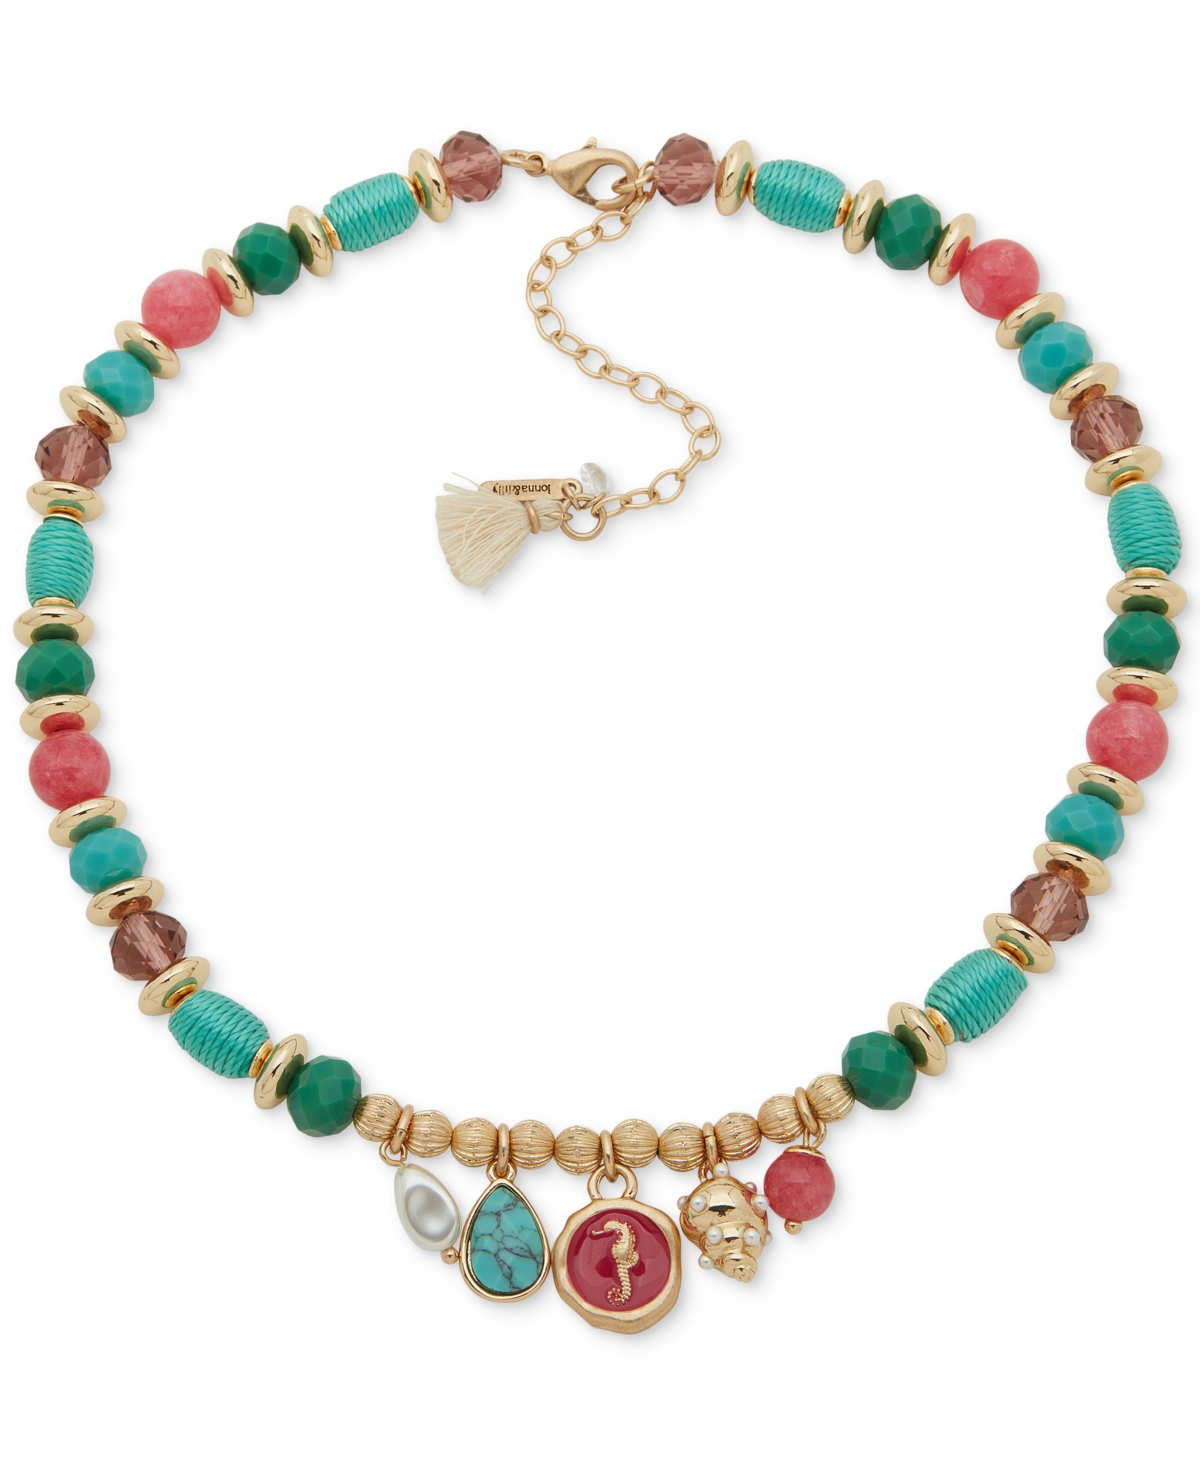 Gold-Tone Mixed Stone & Thread-Wrapped Beaded Sea-Motif Charm Necklace, 16" + 3" extender - Multi